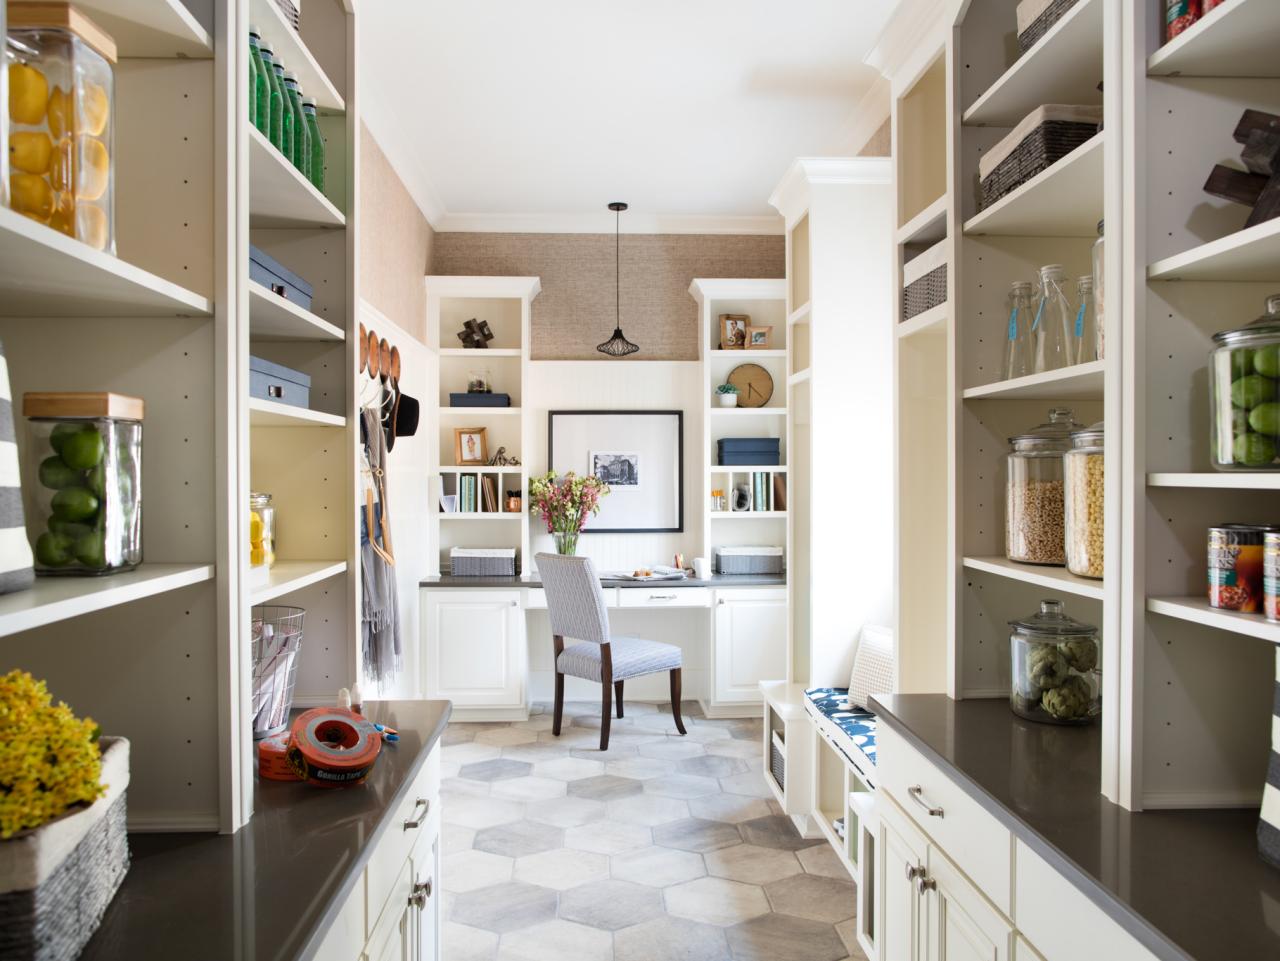 What Are The 9 Steps In Organizing Kitchen Cabinets